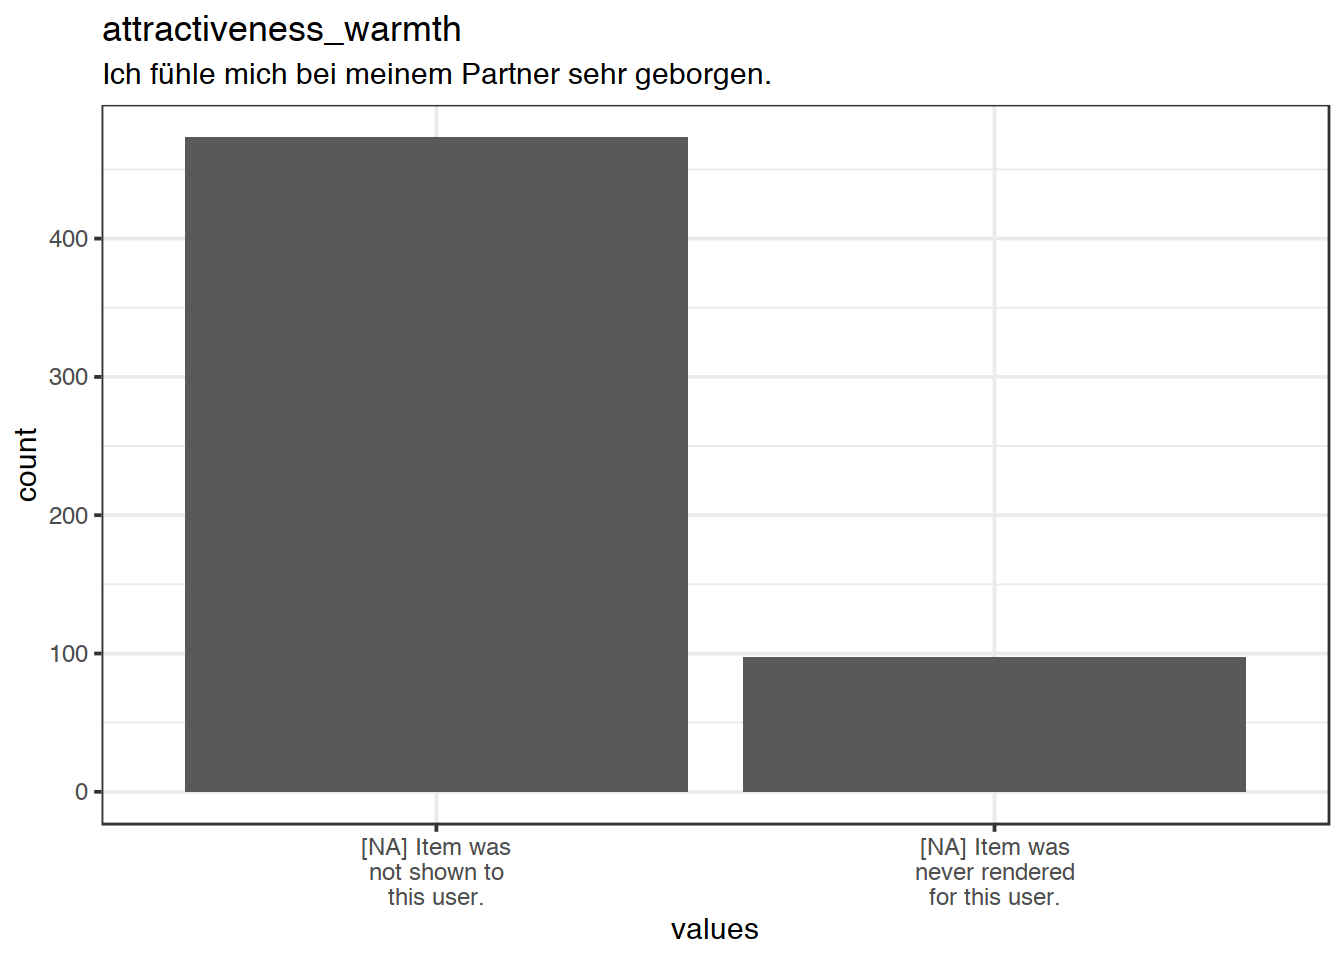 Plot of missing values for attractiveness_warmth